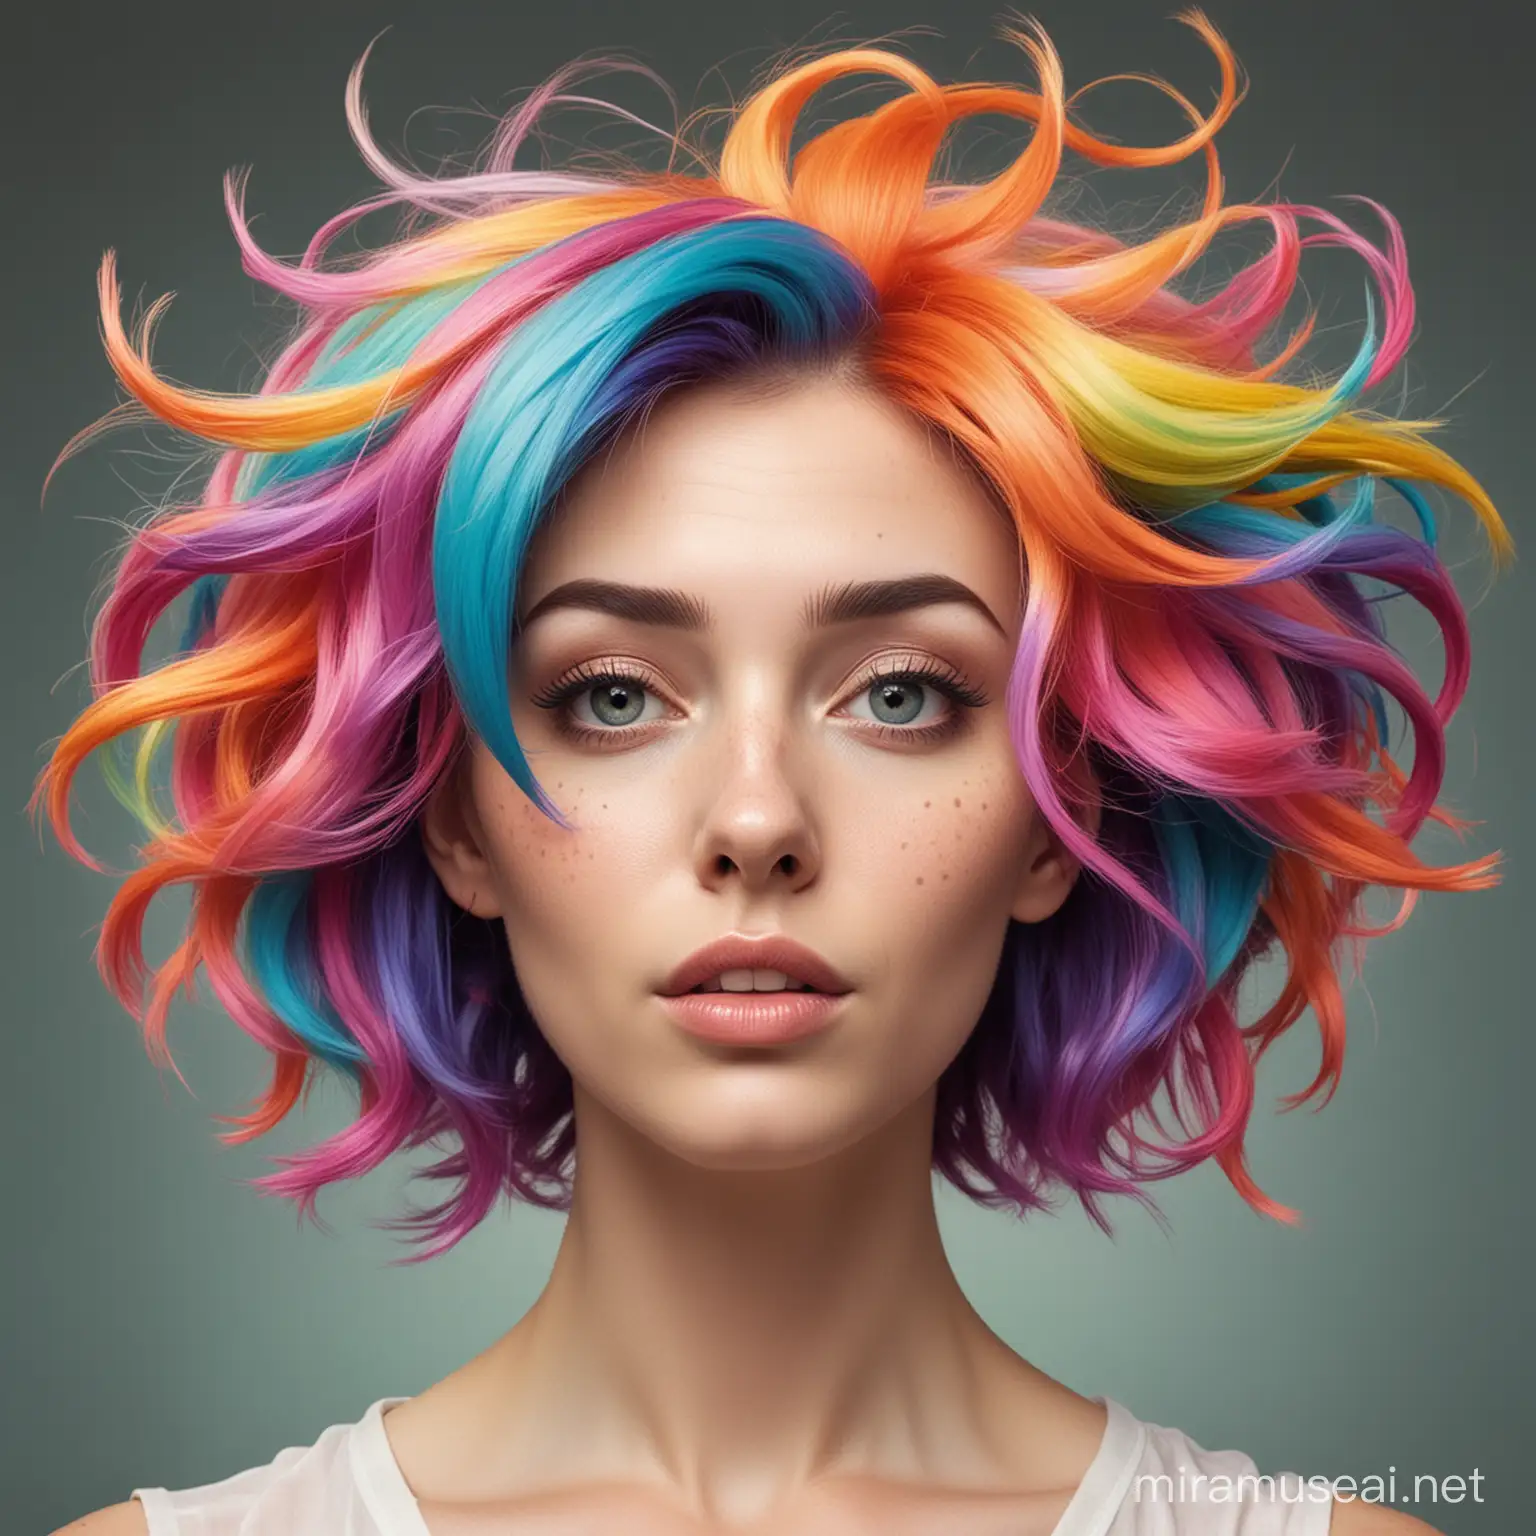 Eccentric Female Artist with Colorful Hair in Whimsical Setting